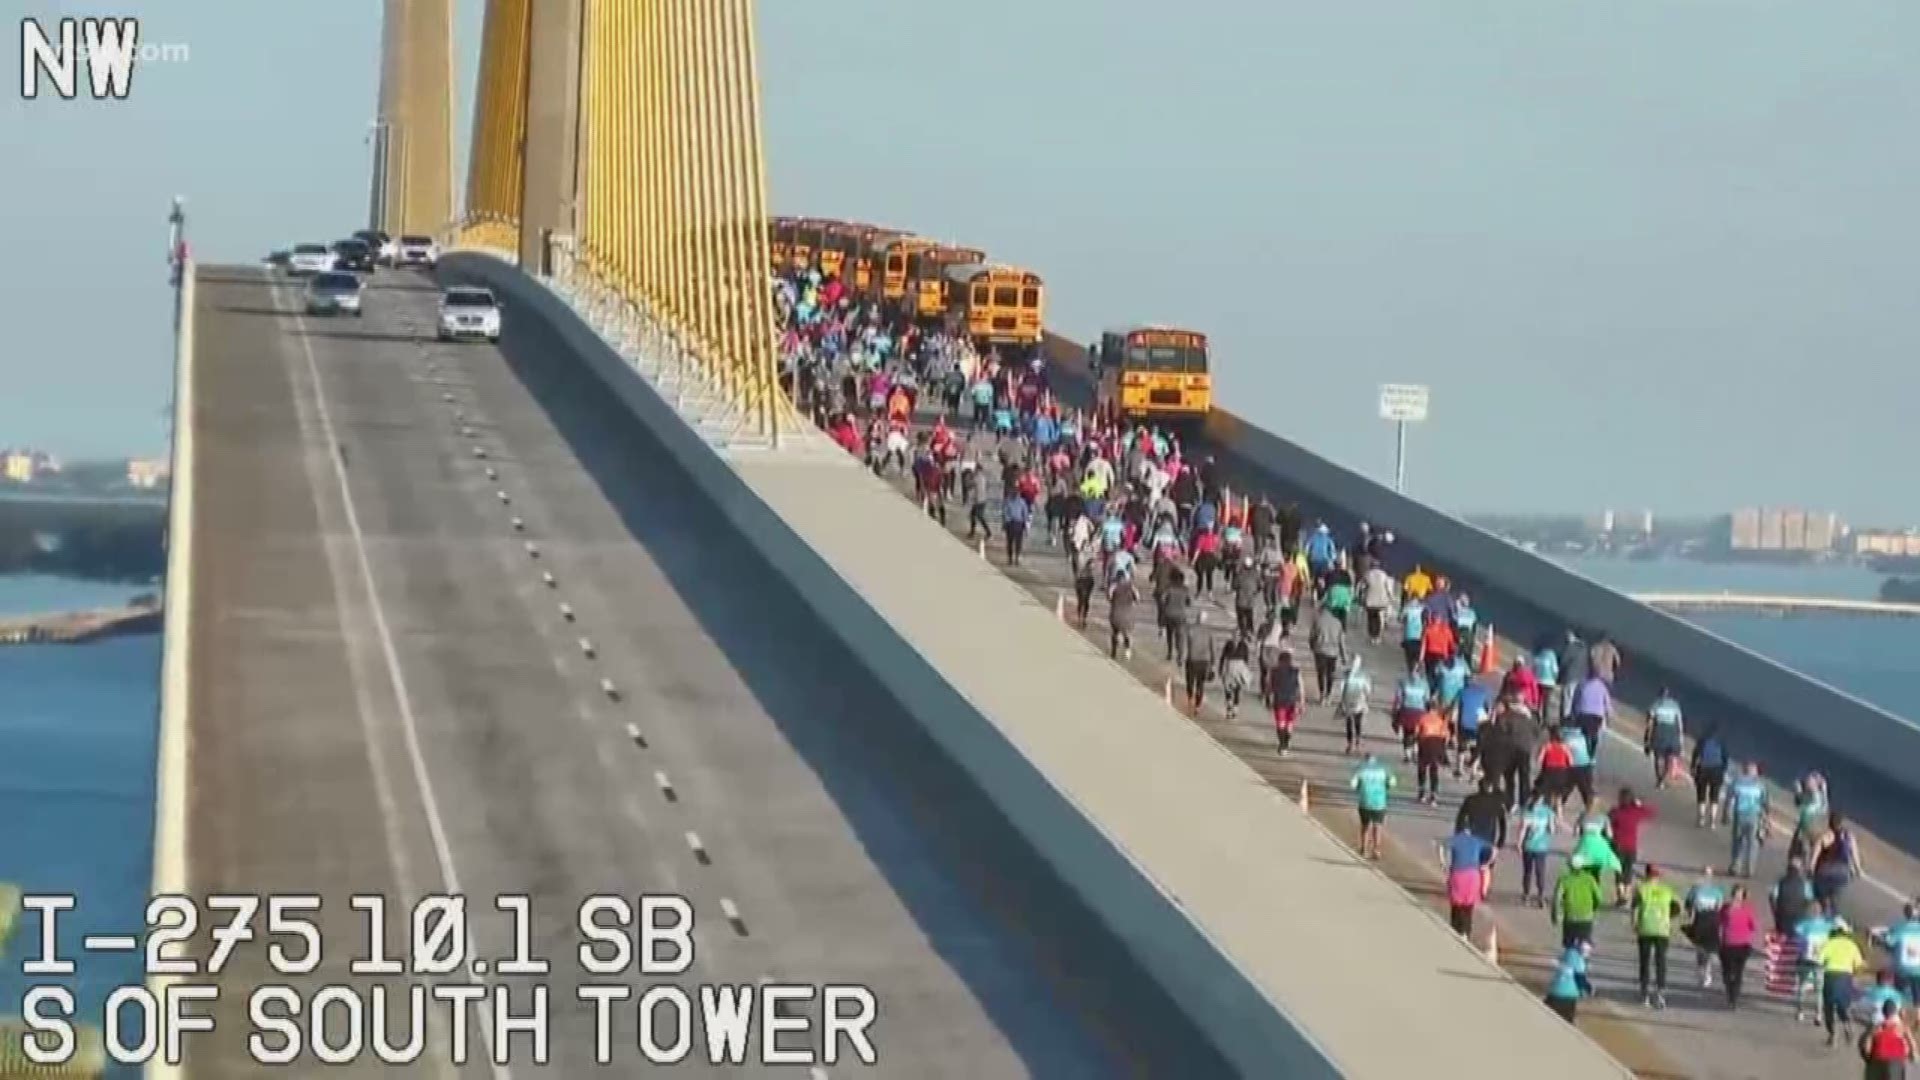 All proceeds from the Skyway 10K go to the Armed Forces Families Foundation. This year marks the third annual race of the Sunshine Skyway Bridge over Tampa Bay.